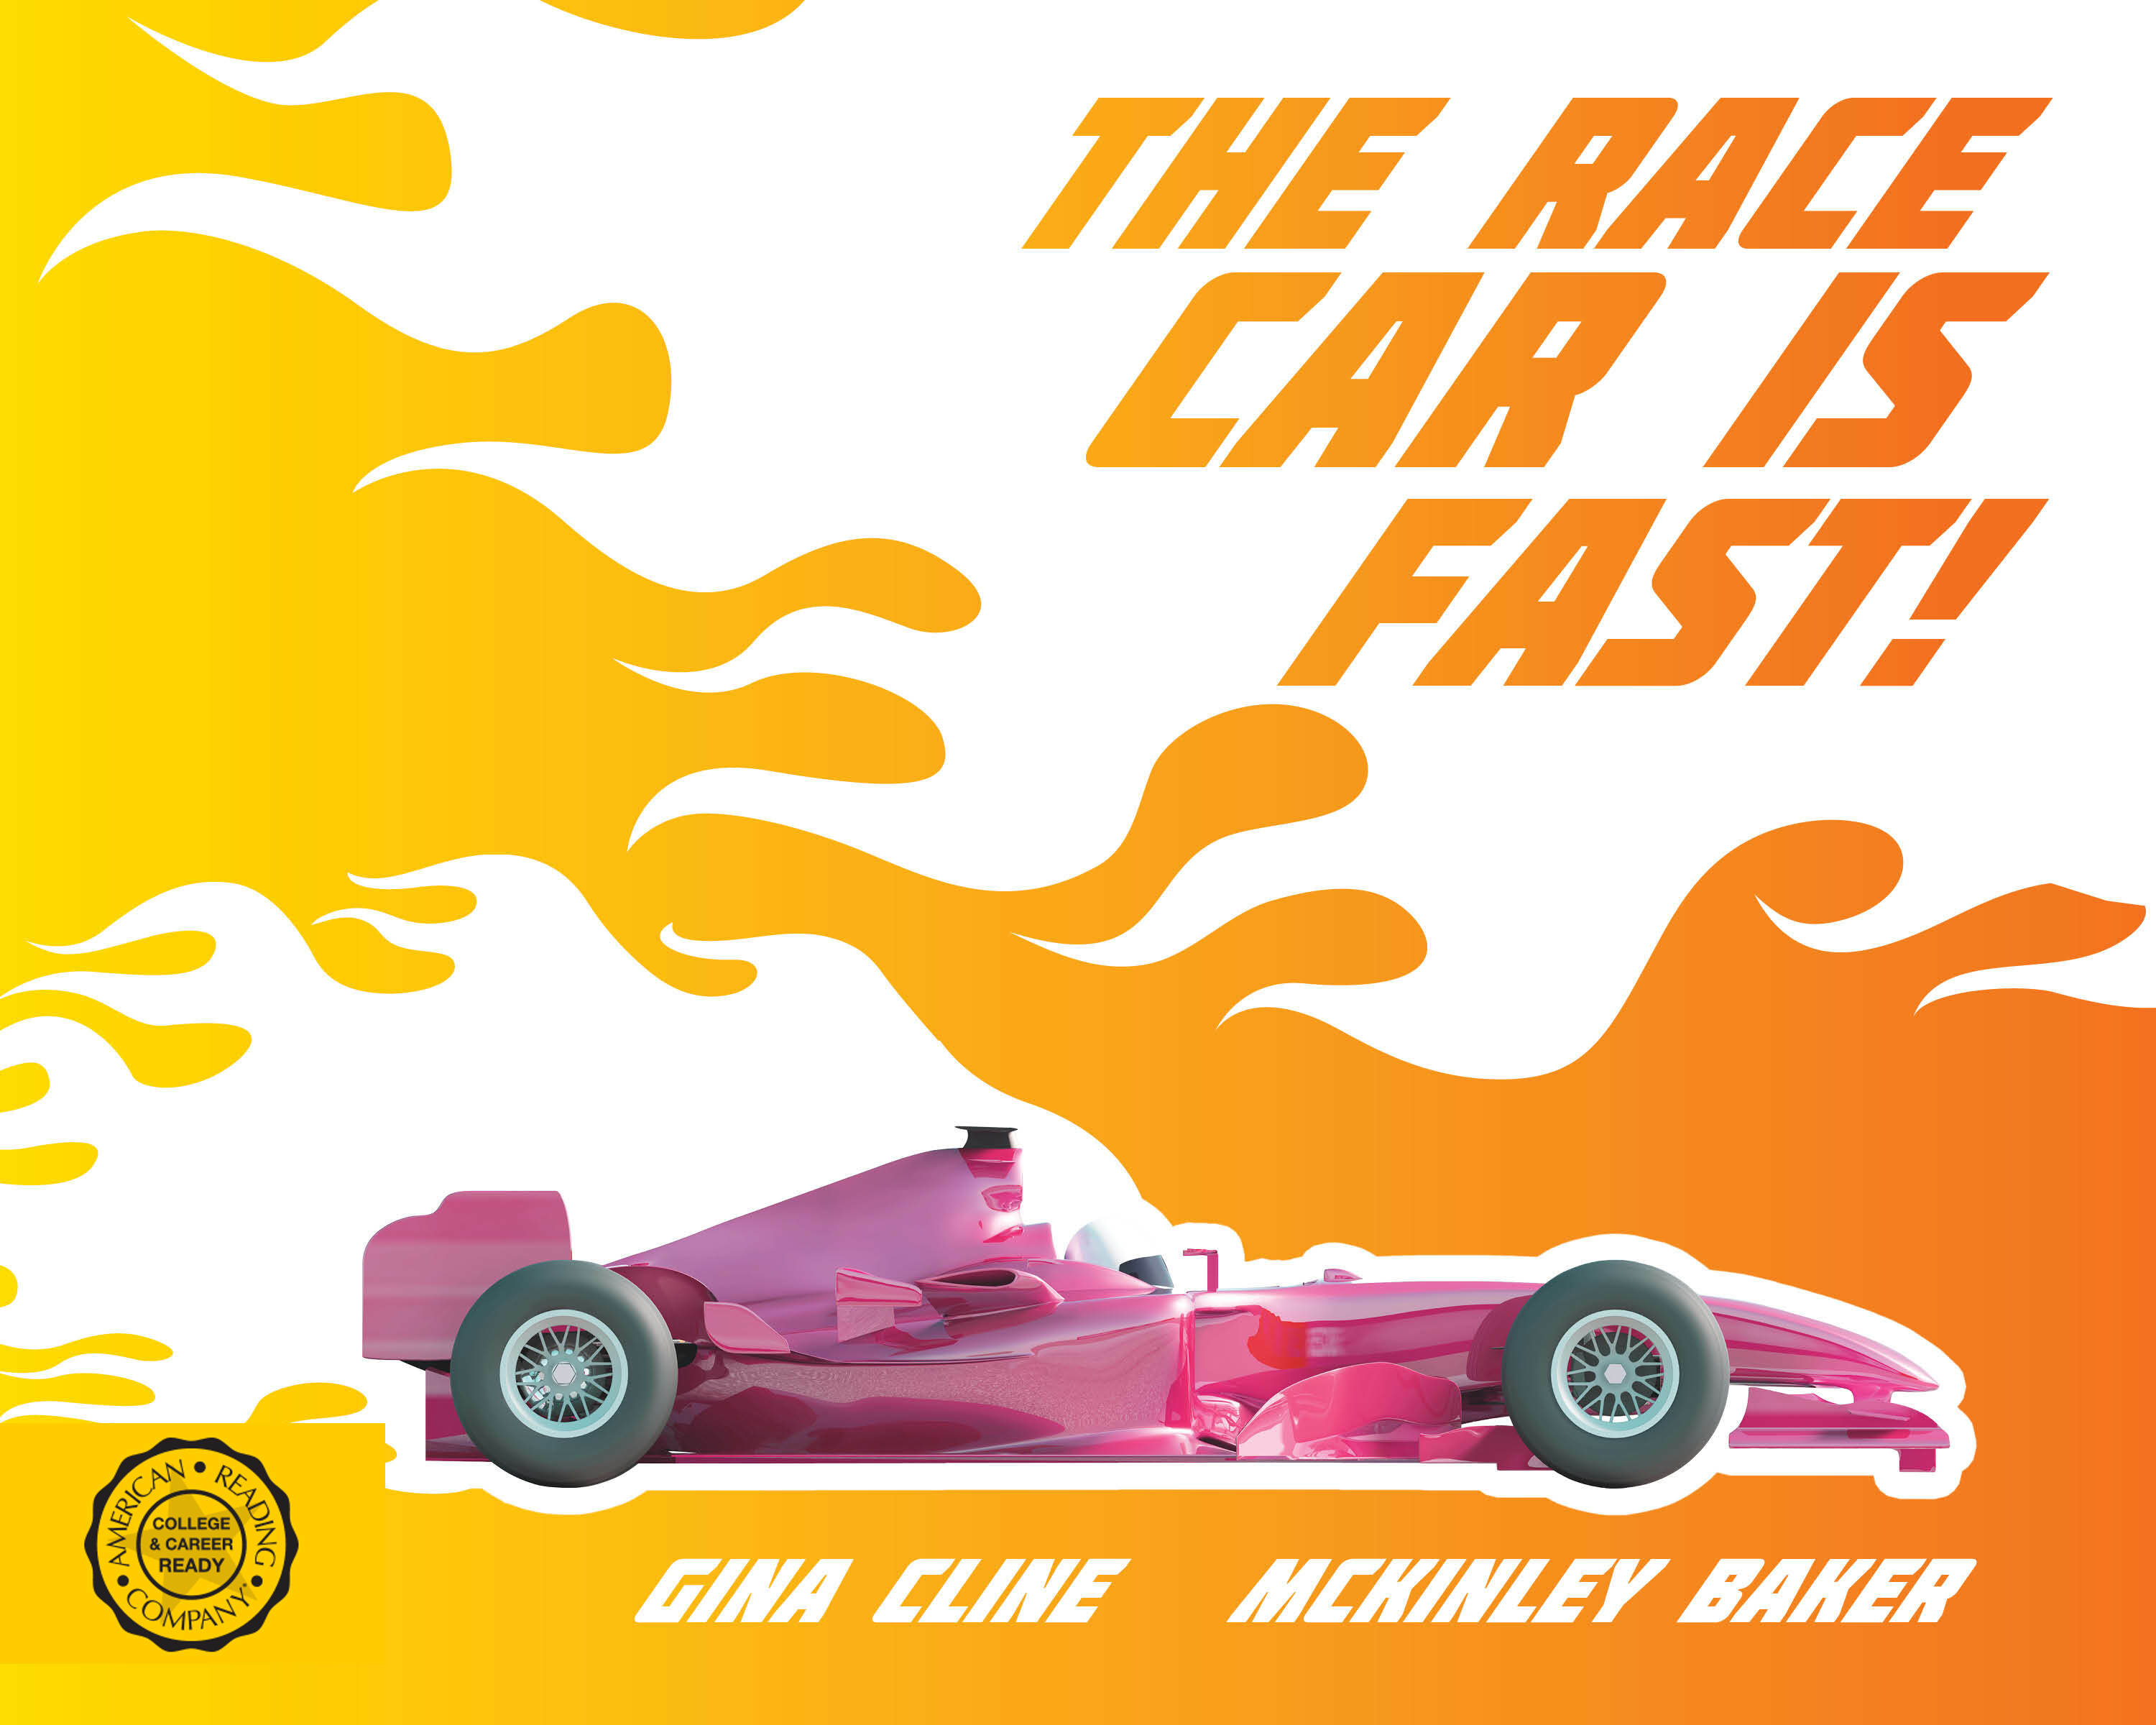 The Race Car Is Fast! by Gina Cline (9781640530911)